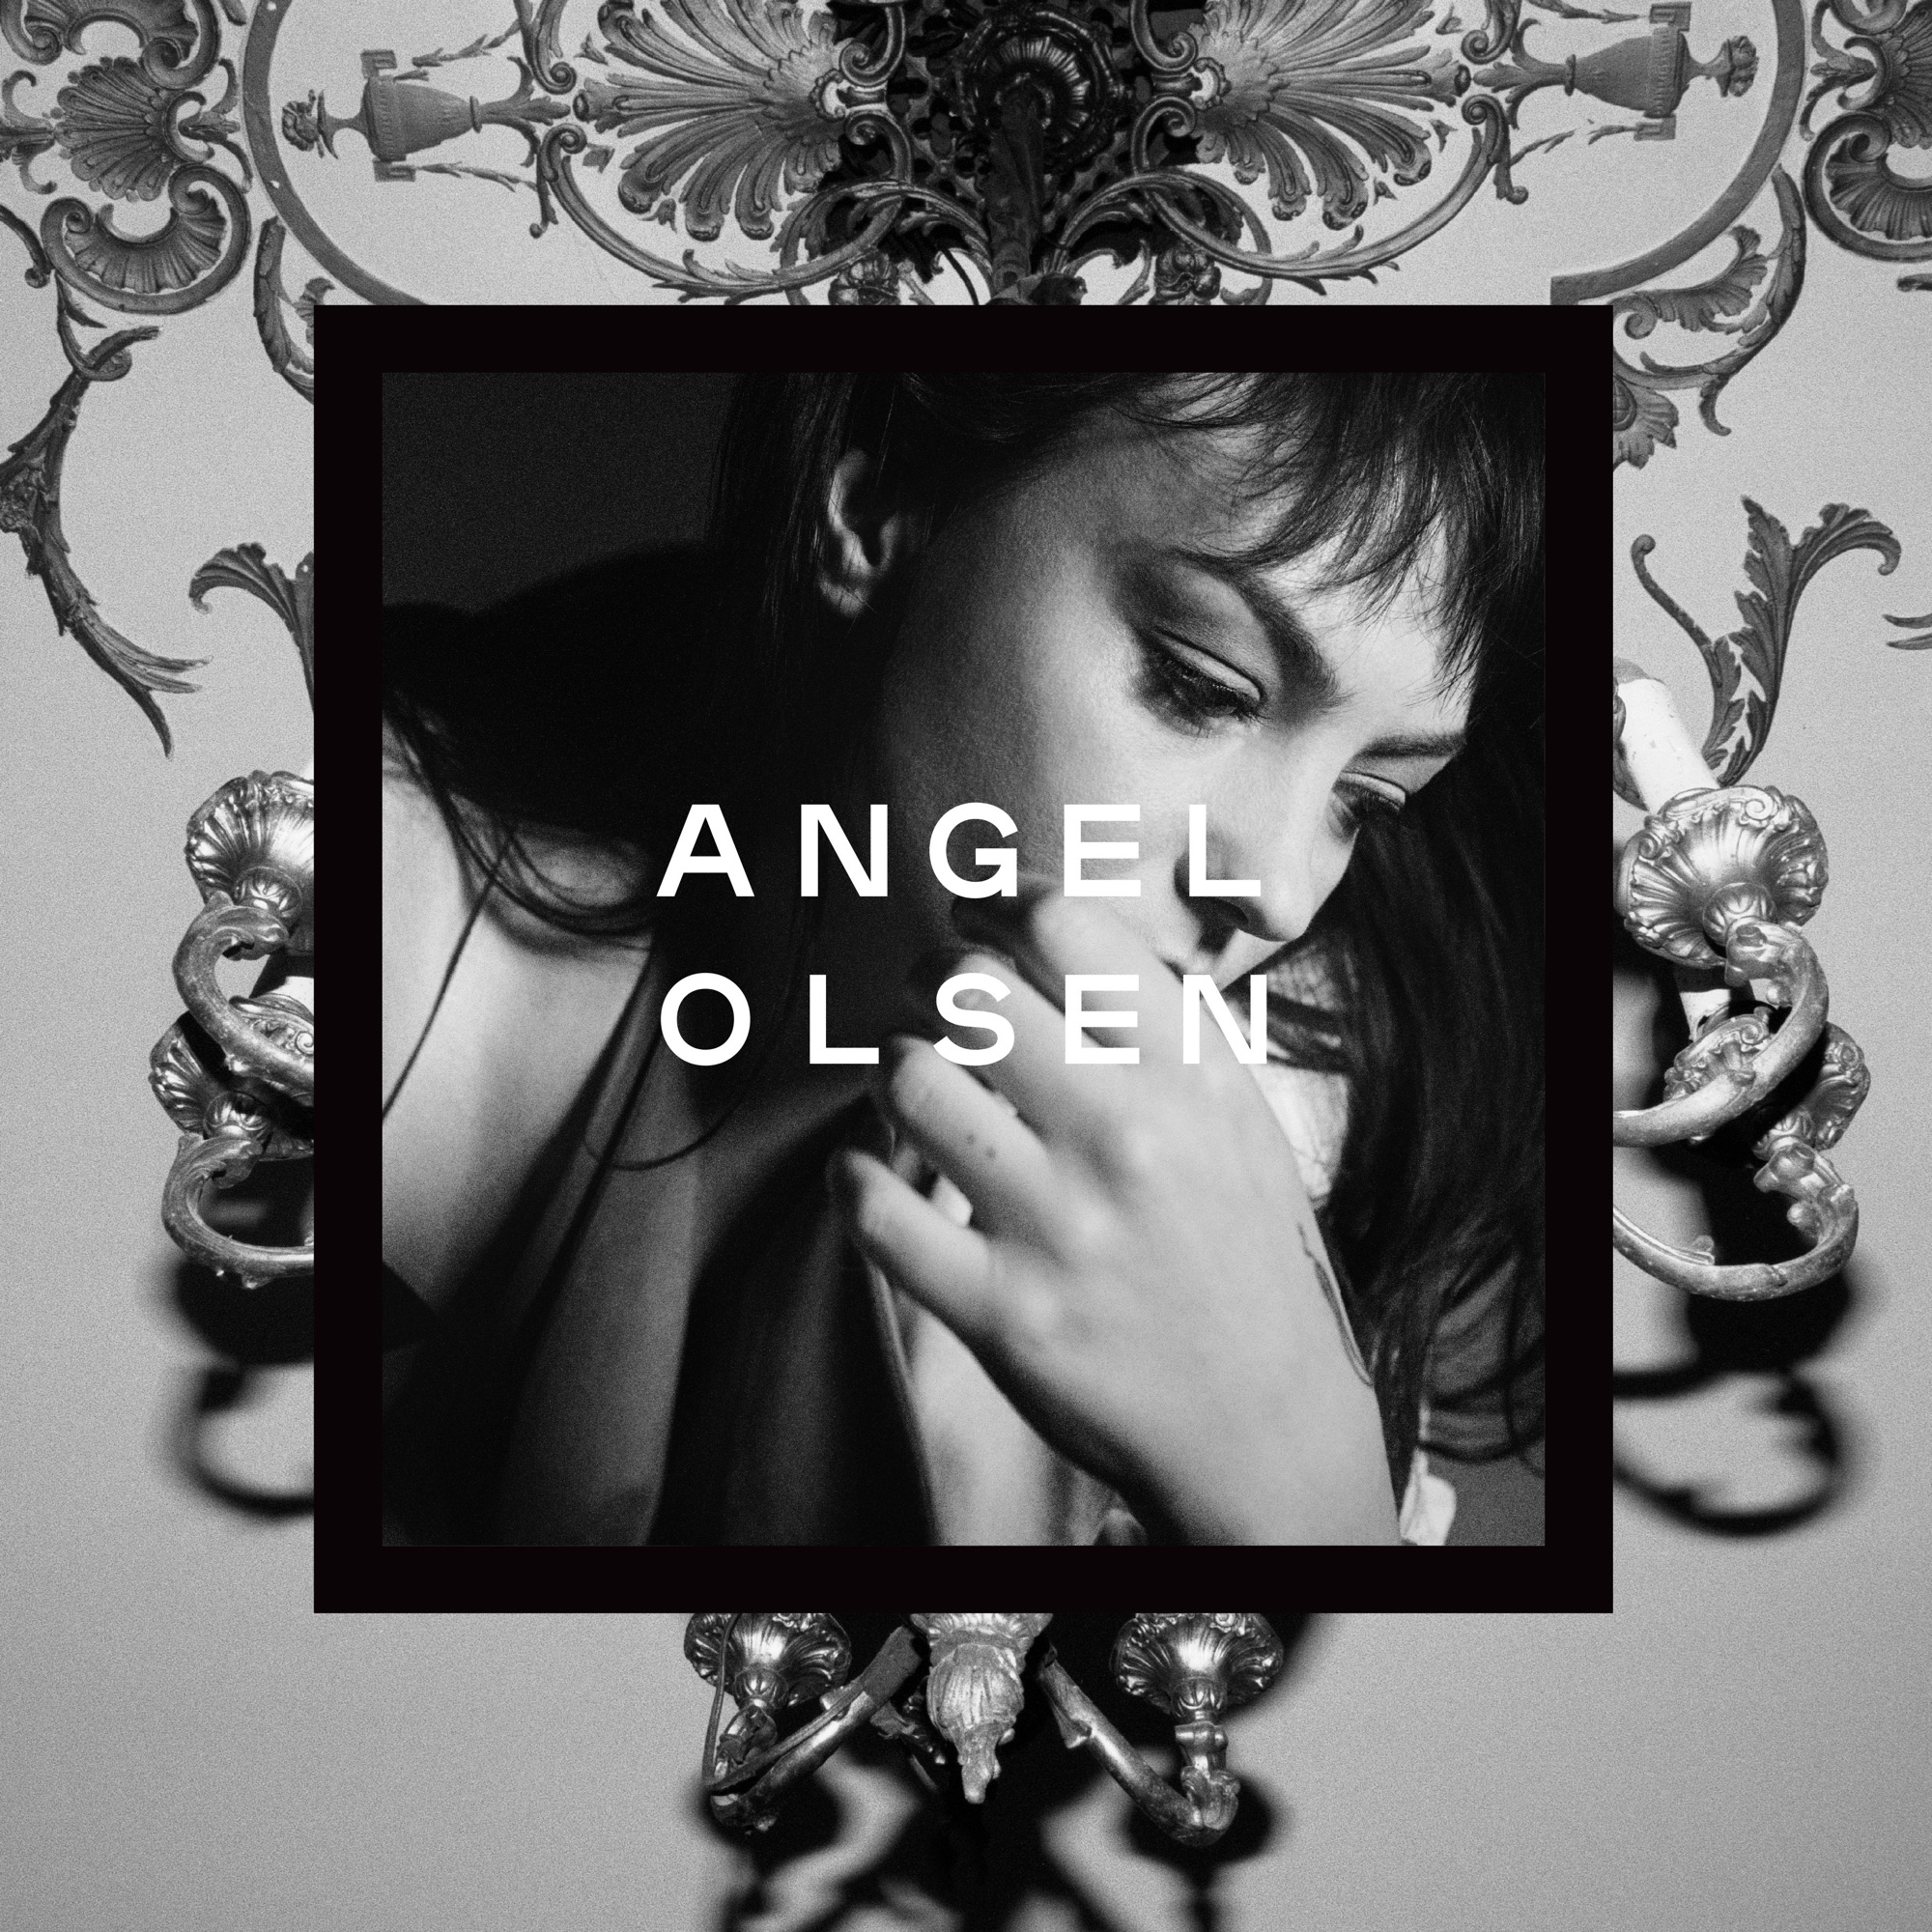 Angel Olsen - Alive and Dying (Waving, Smiling) - Single